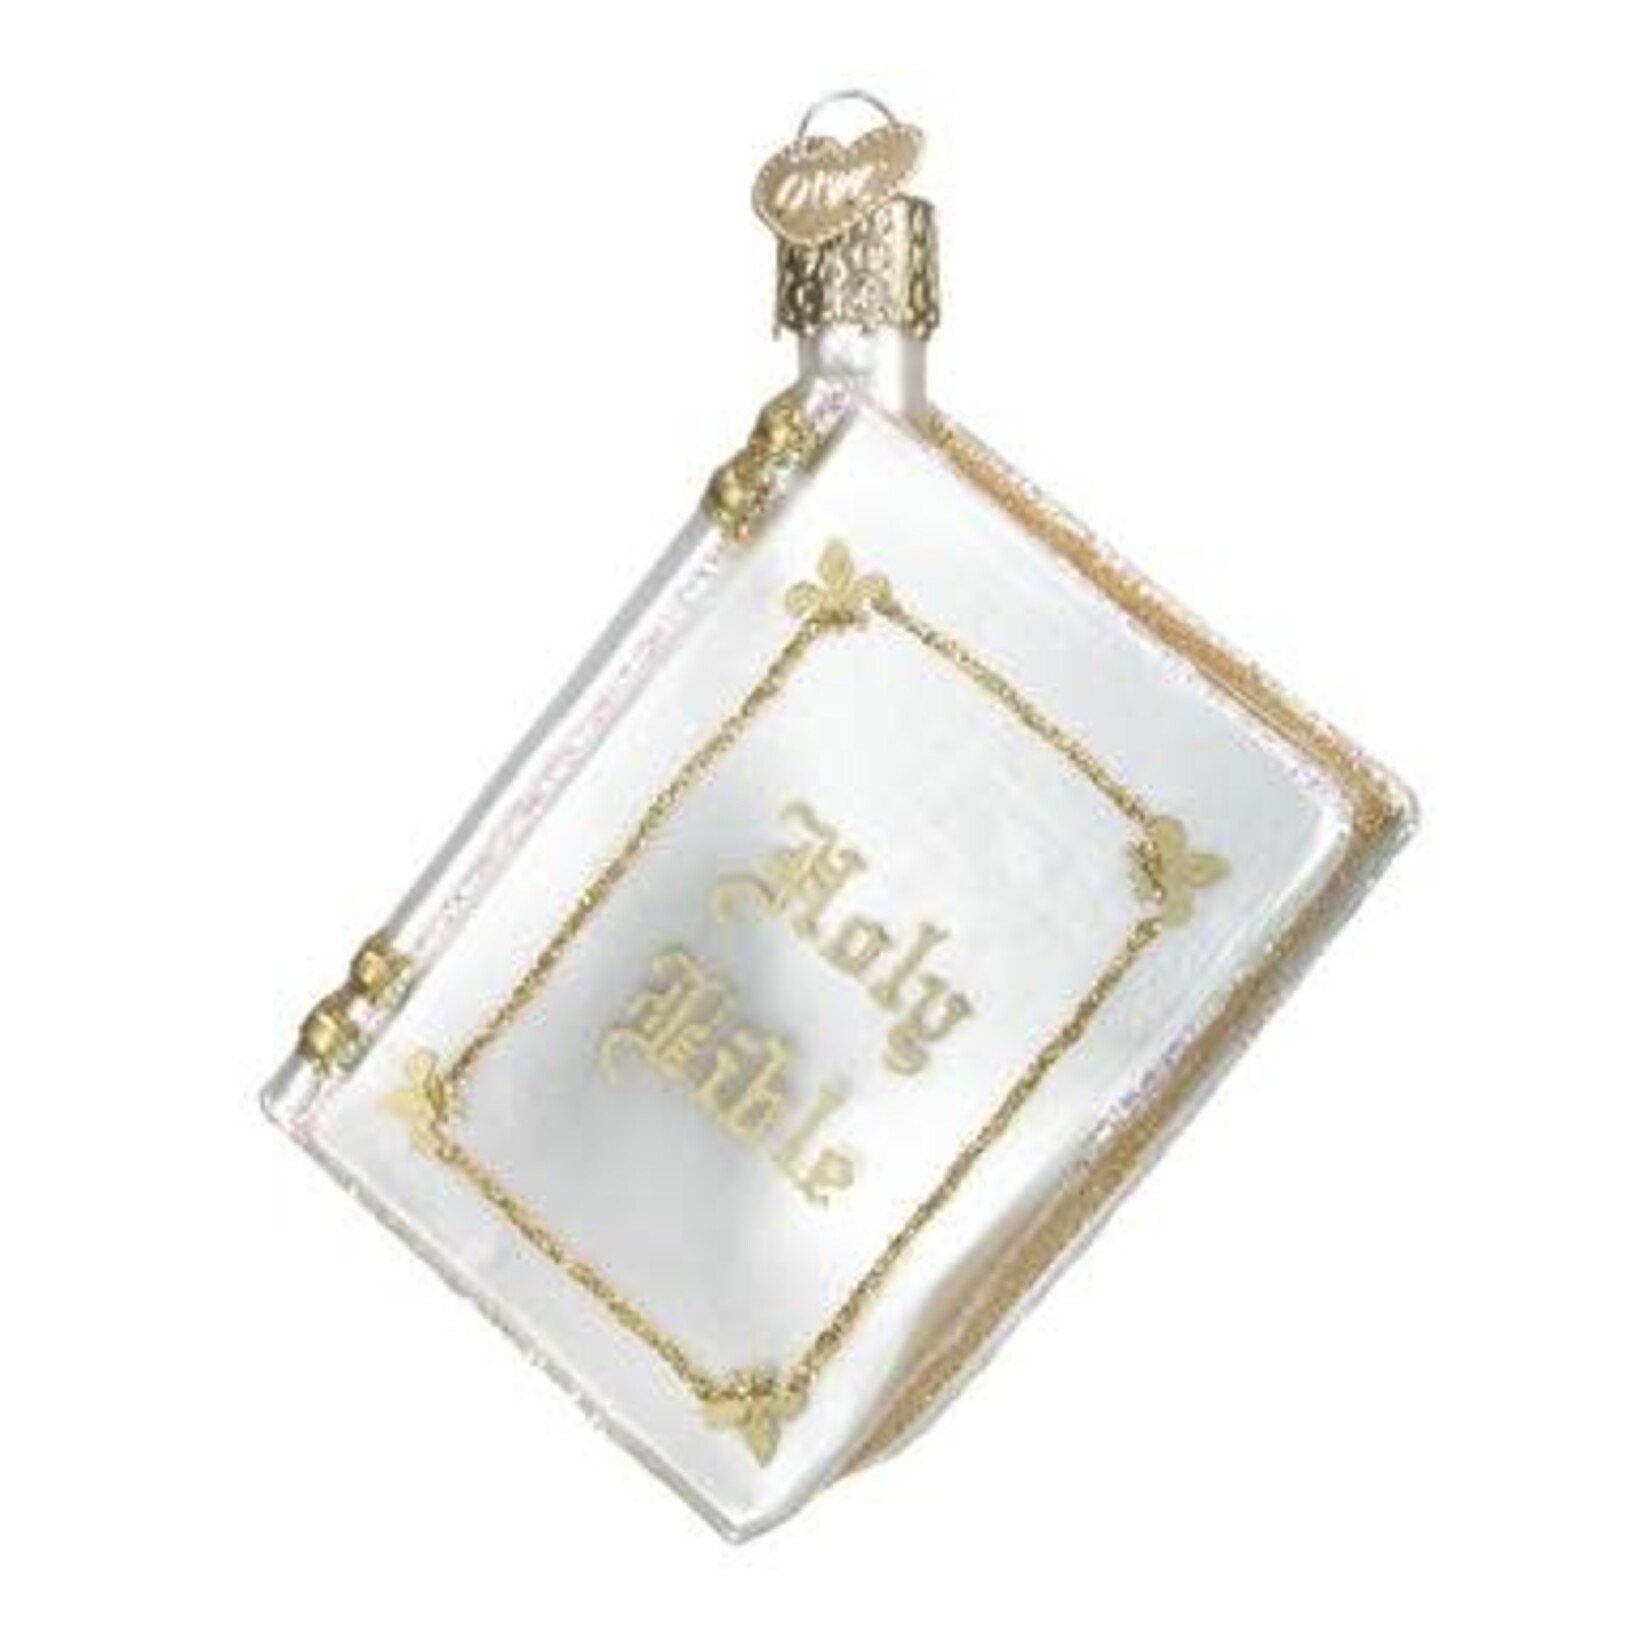 Old World Christmas Holy Bible Ornament